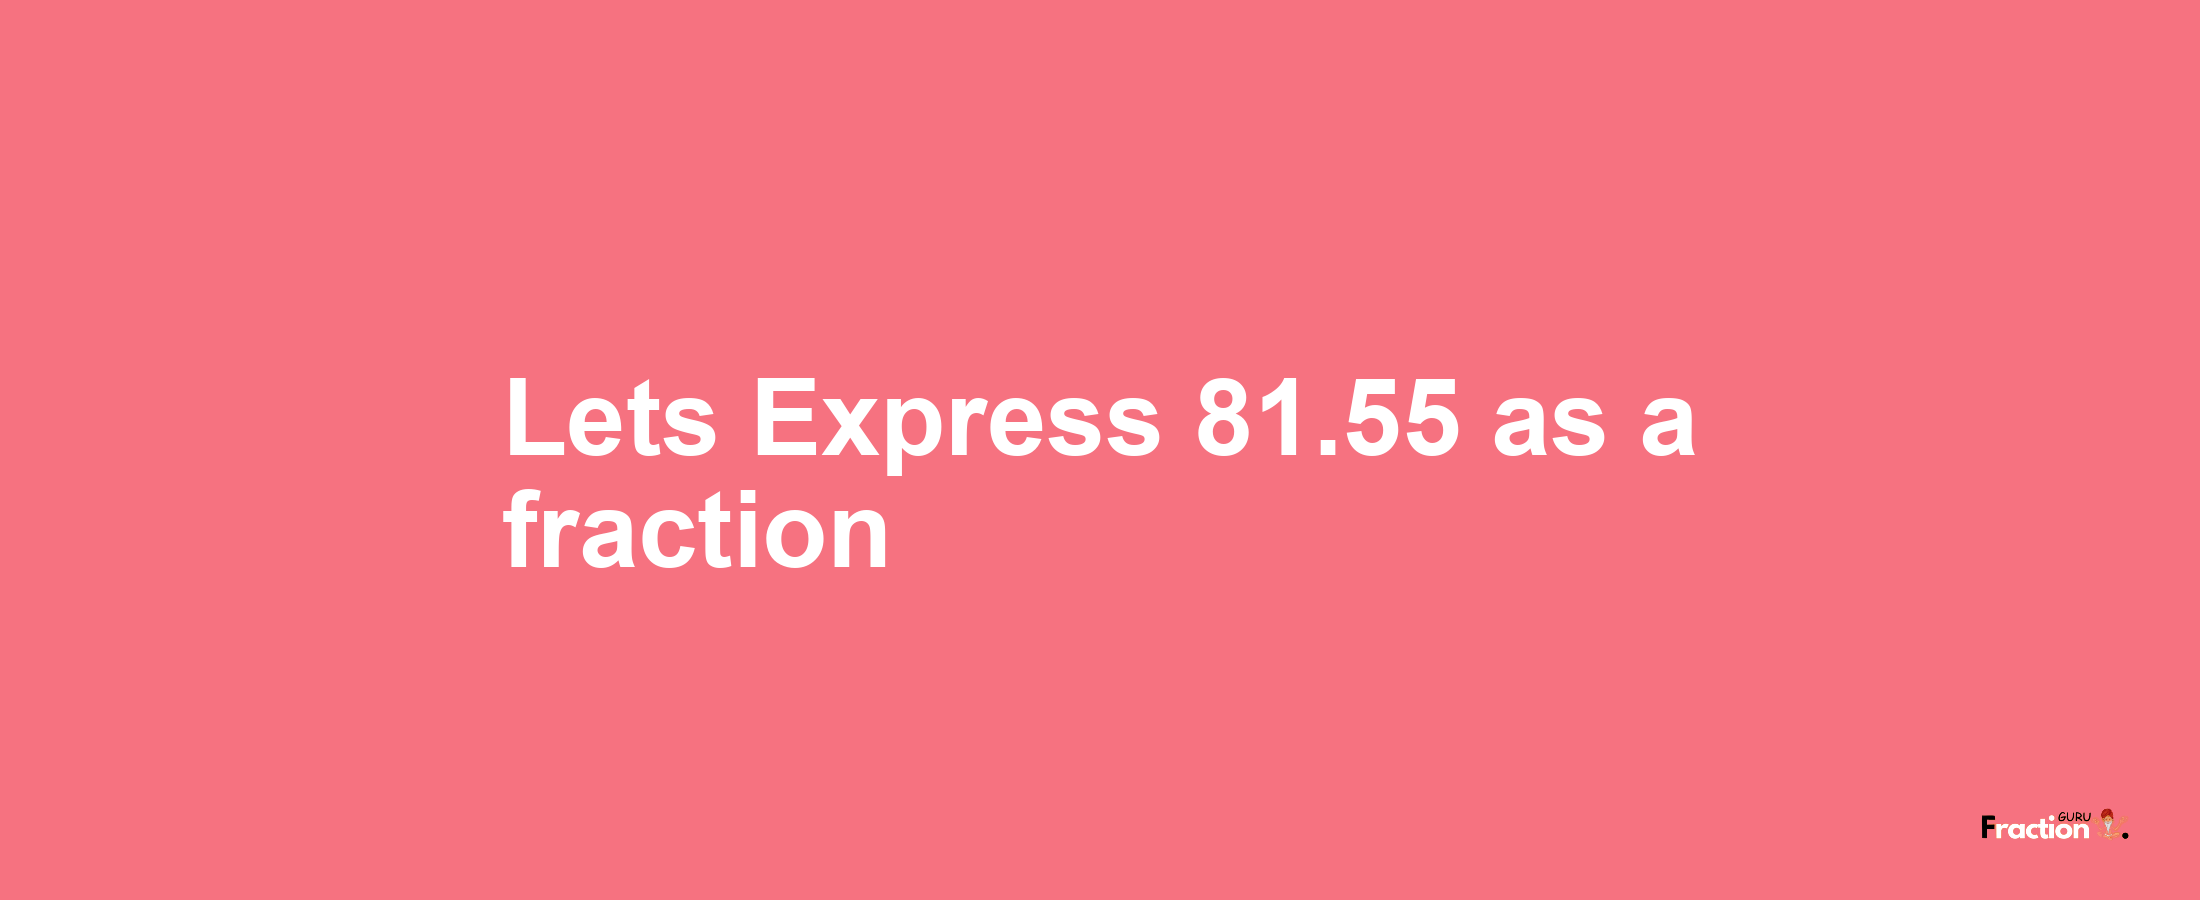 Lets Express 81.55 as afraction